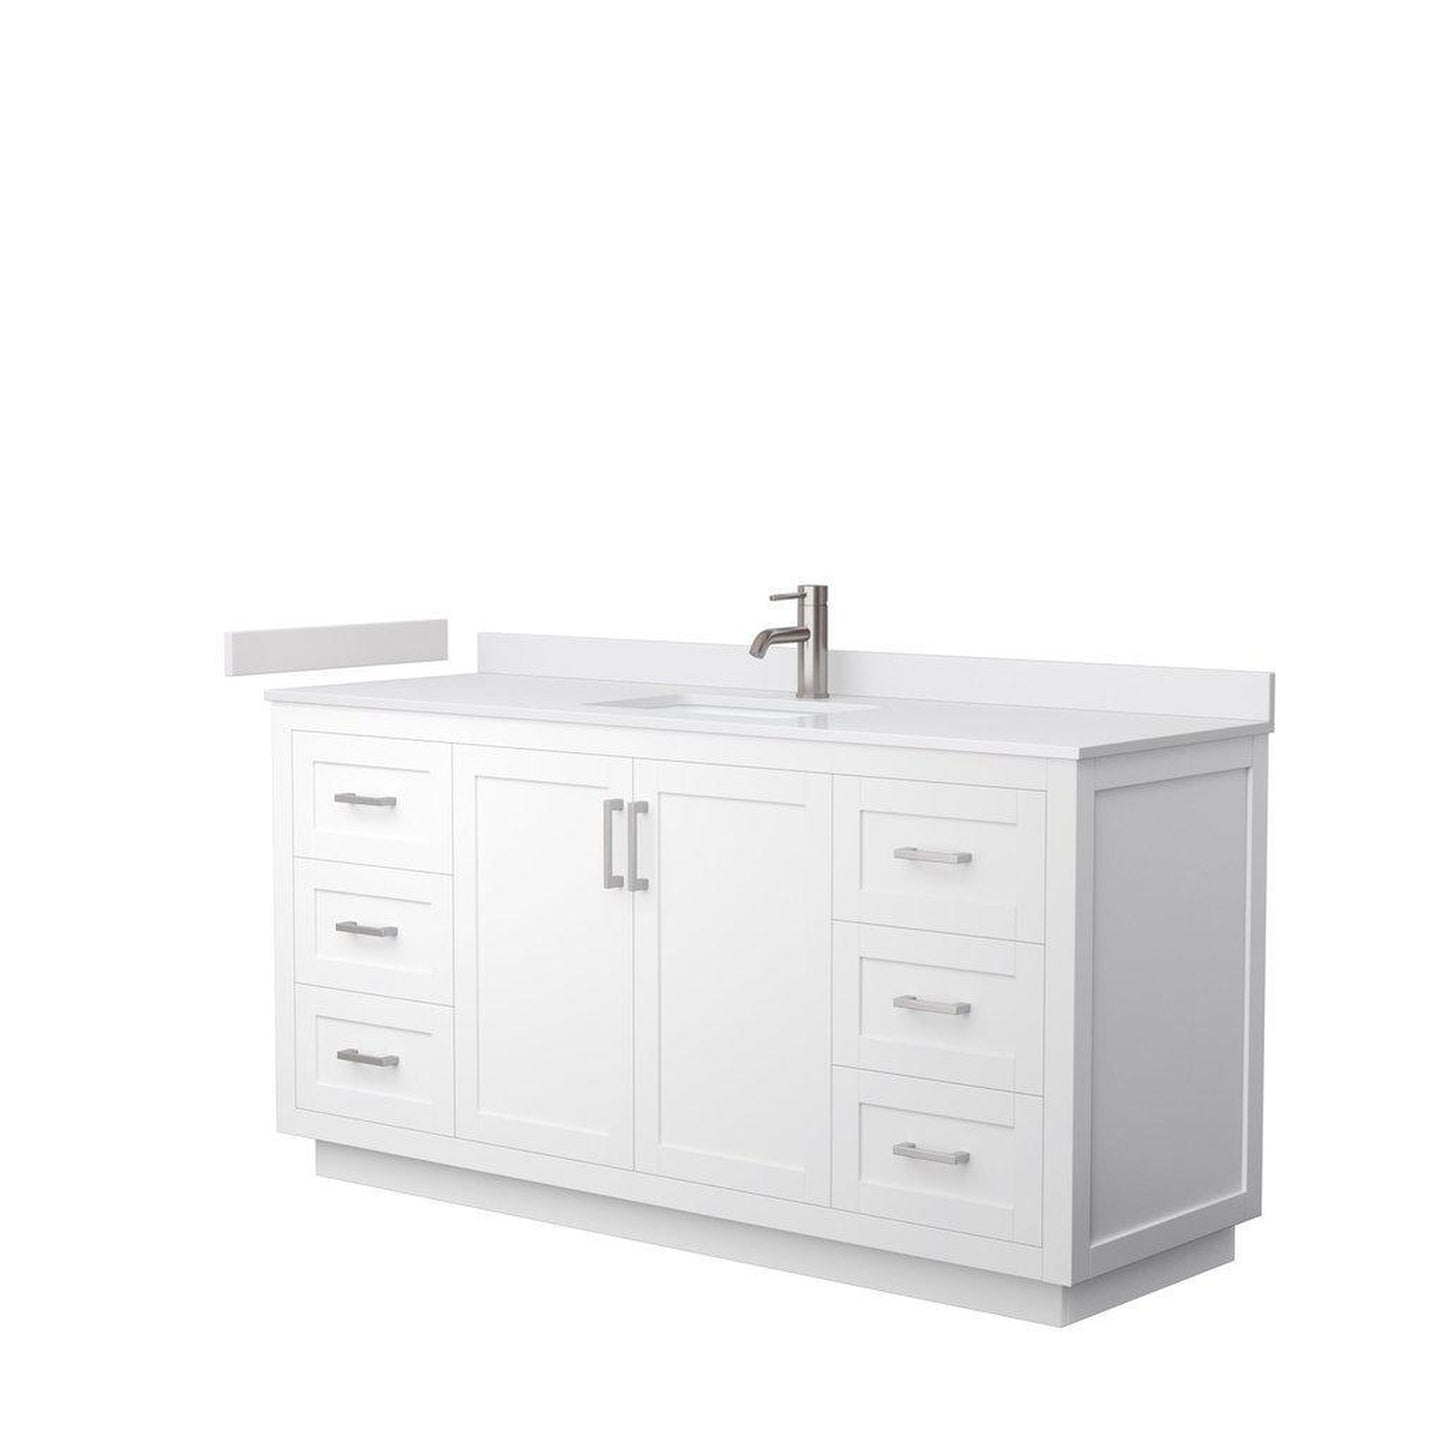 Wyndham Collection Miranda 66" Single Bathroom White Vanity Set With White Cultured Marble Countertop, Undermount Square Sink, And Brushed Nickel Trim